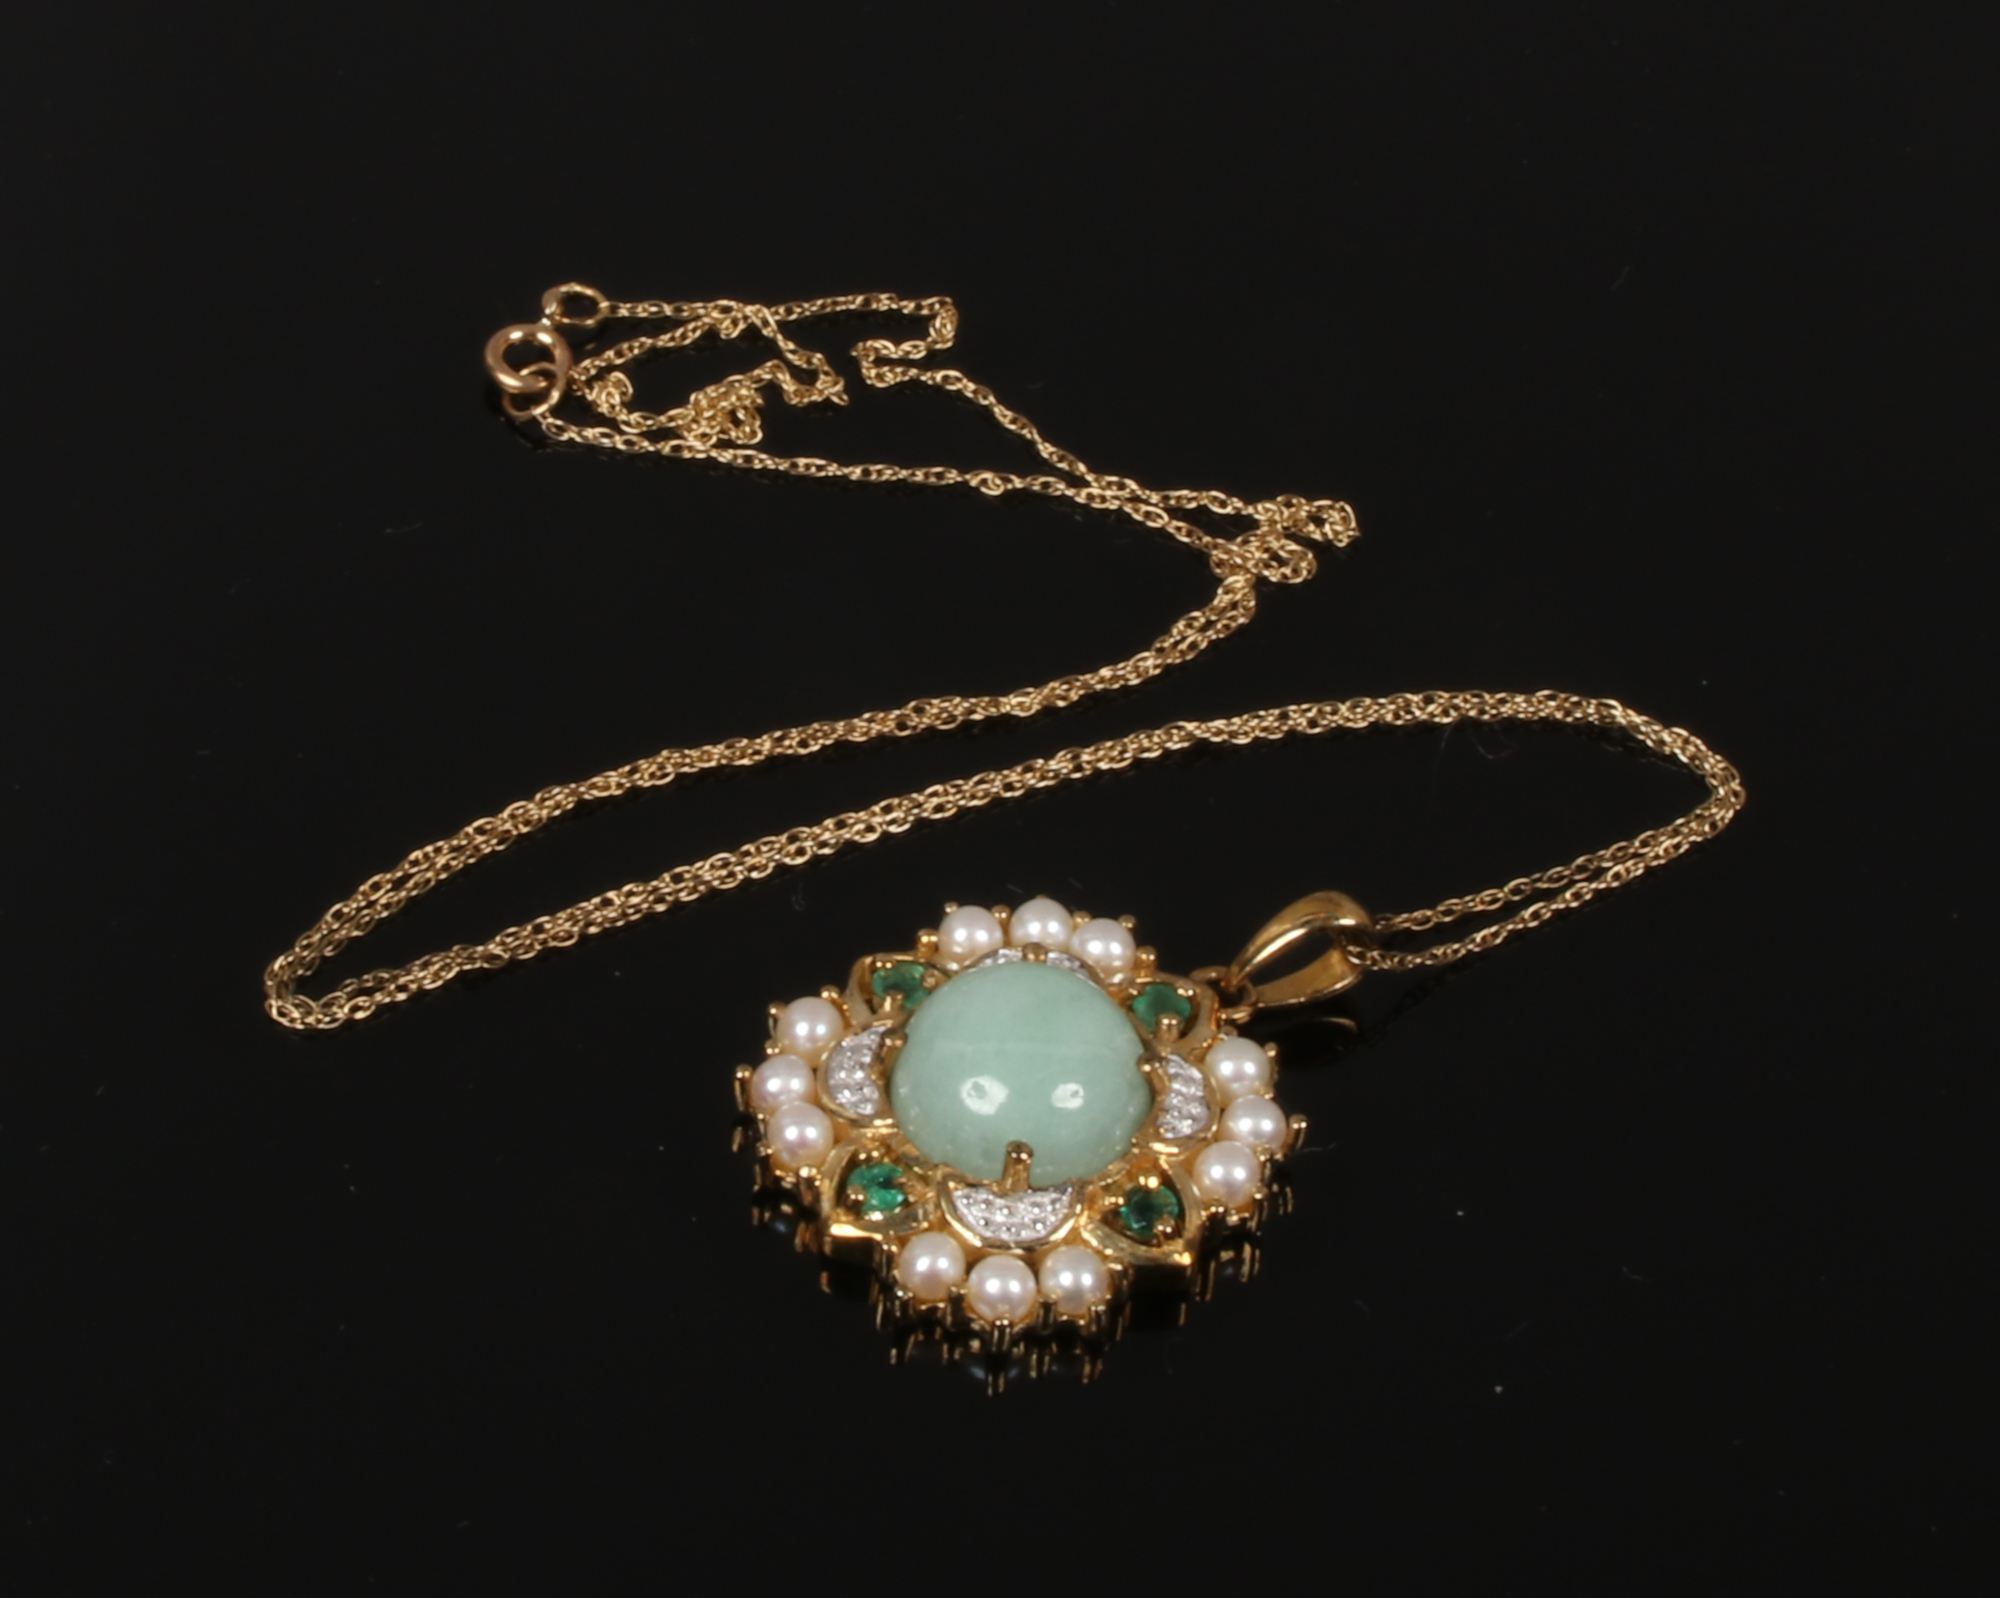 A 9ct gold pendant and chain set with jadeite cabochon centre stone surrounded by seed pearls and